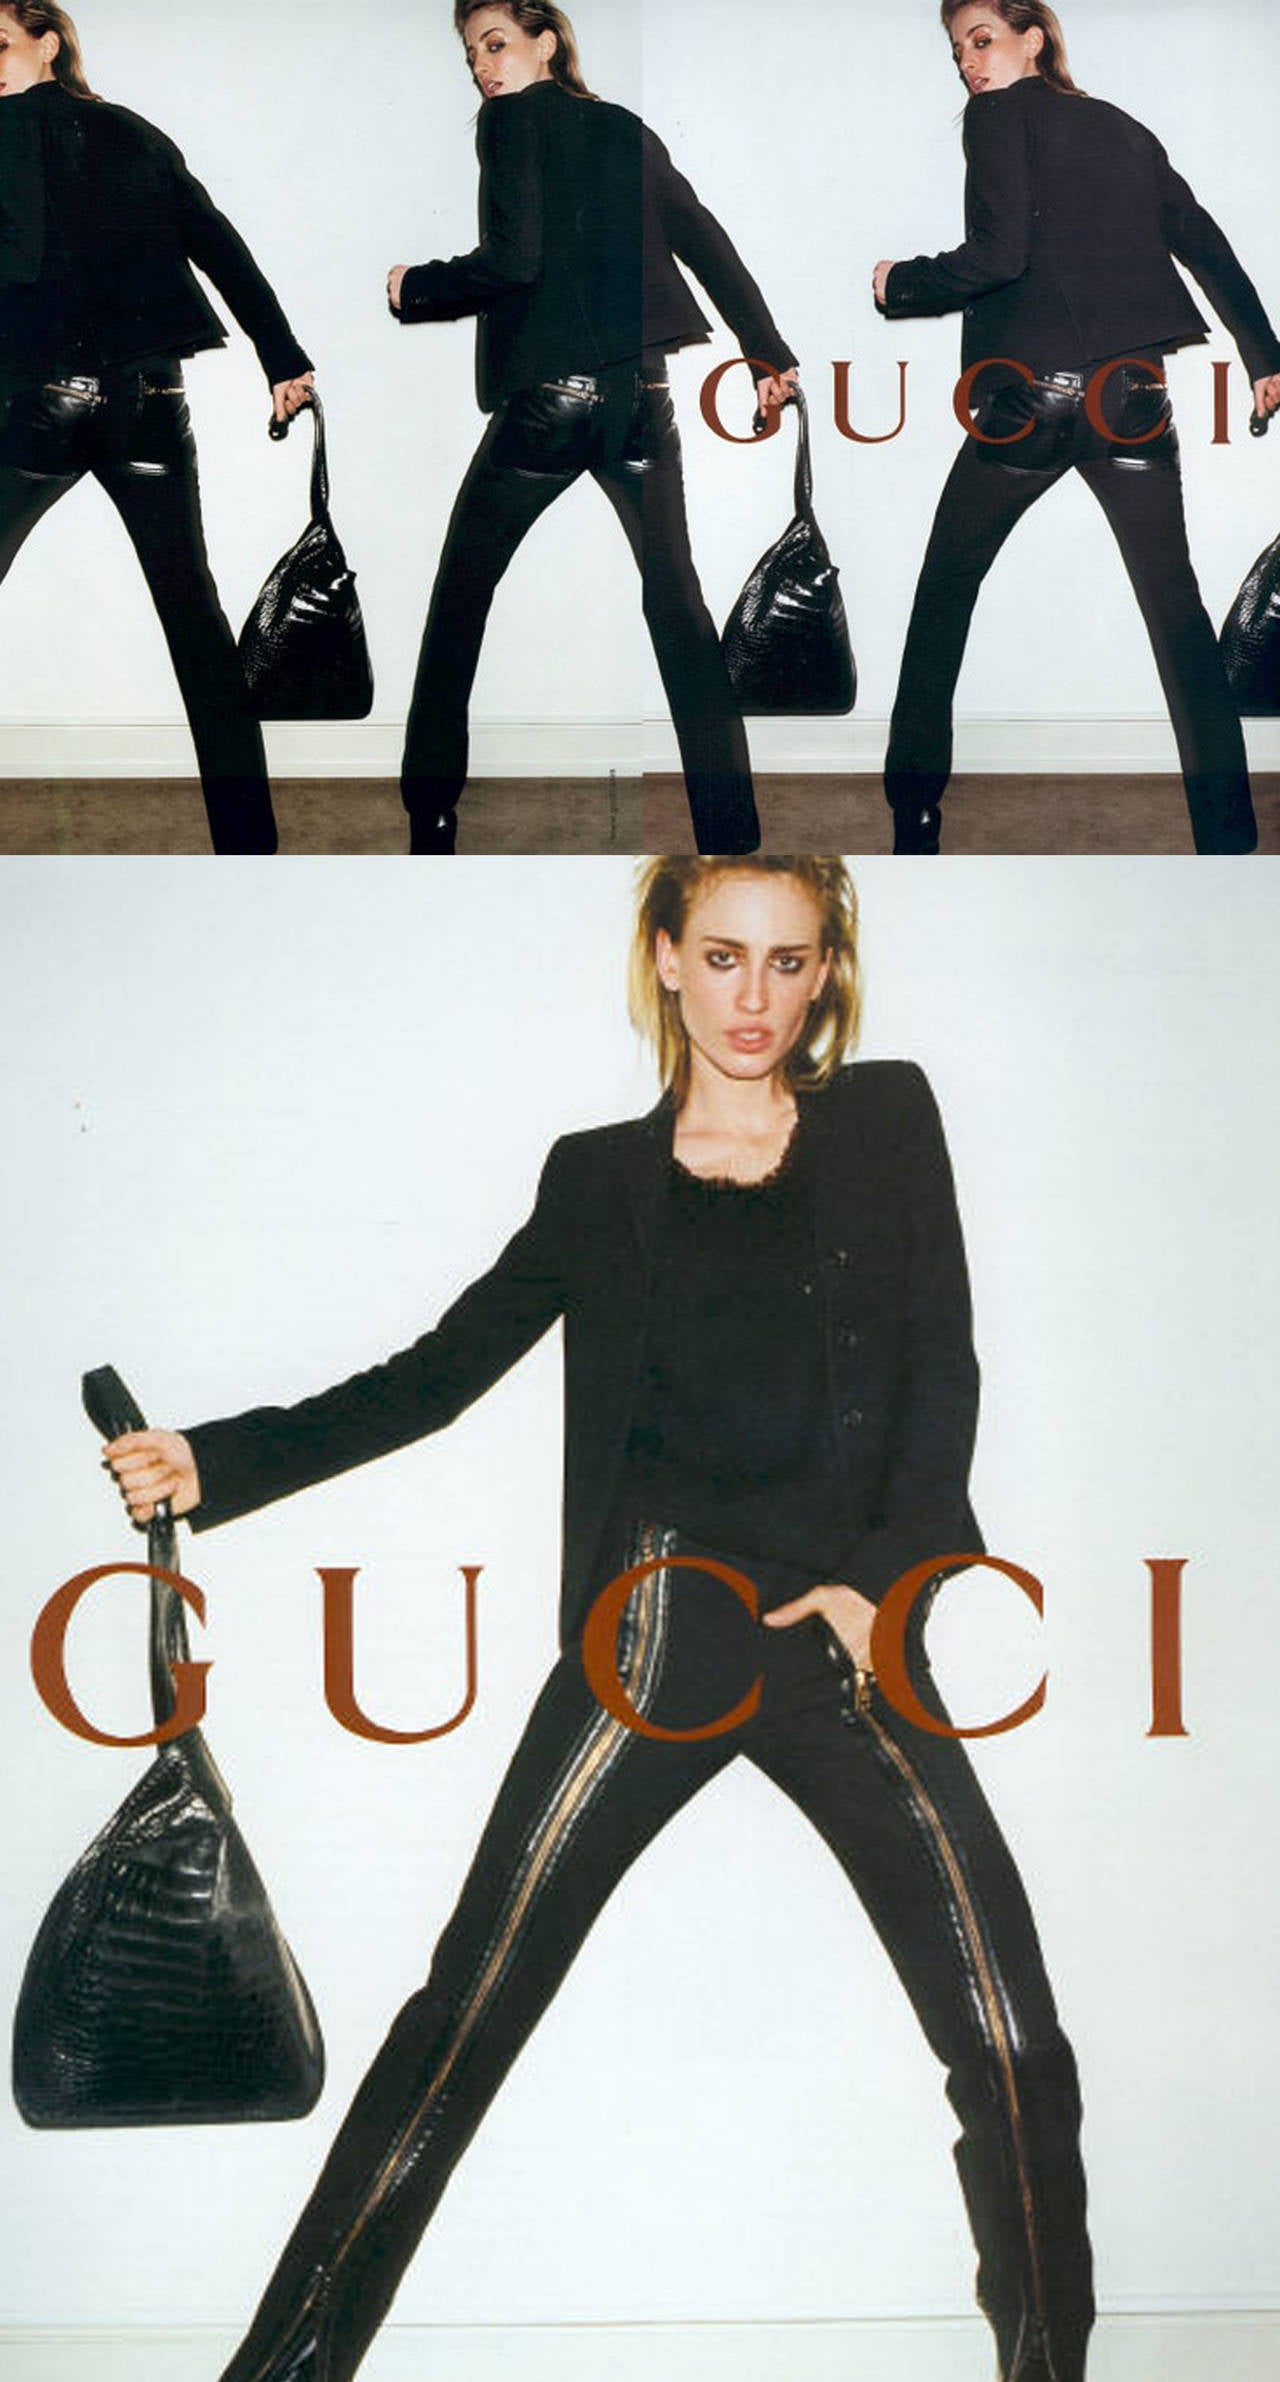 A pair of rare Gucci zipper pants in black rayon and lambskin leather. The pants were featured on the Milan catwalk for the Autumn/Winter 2001 collection and were also photographed by Terry Richardson for the official Gucci print campaign. The pants